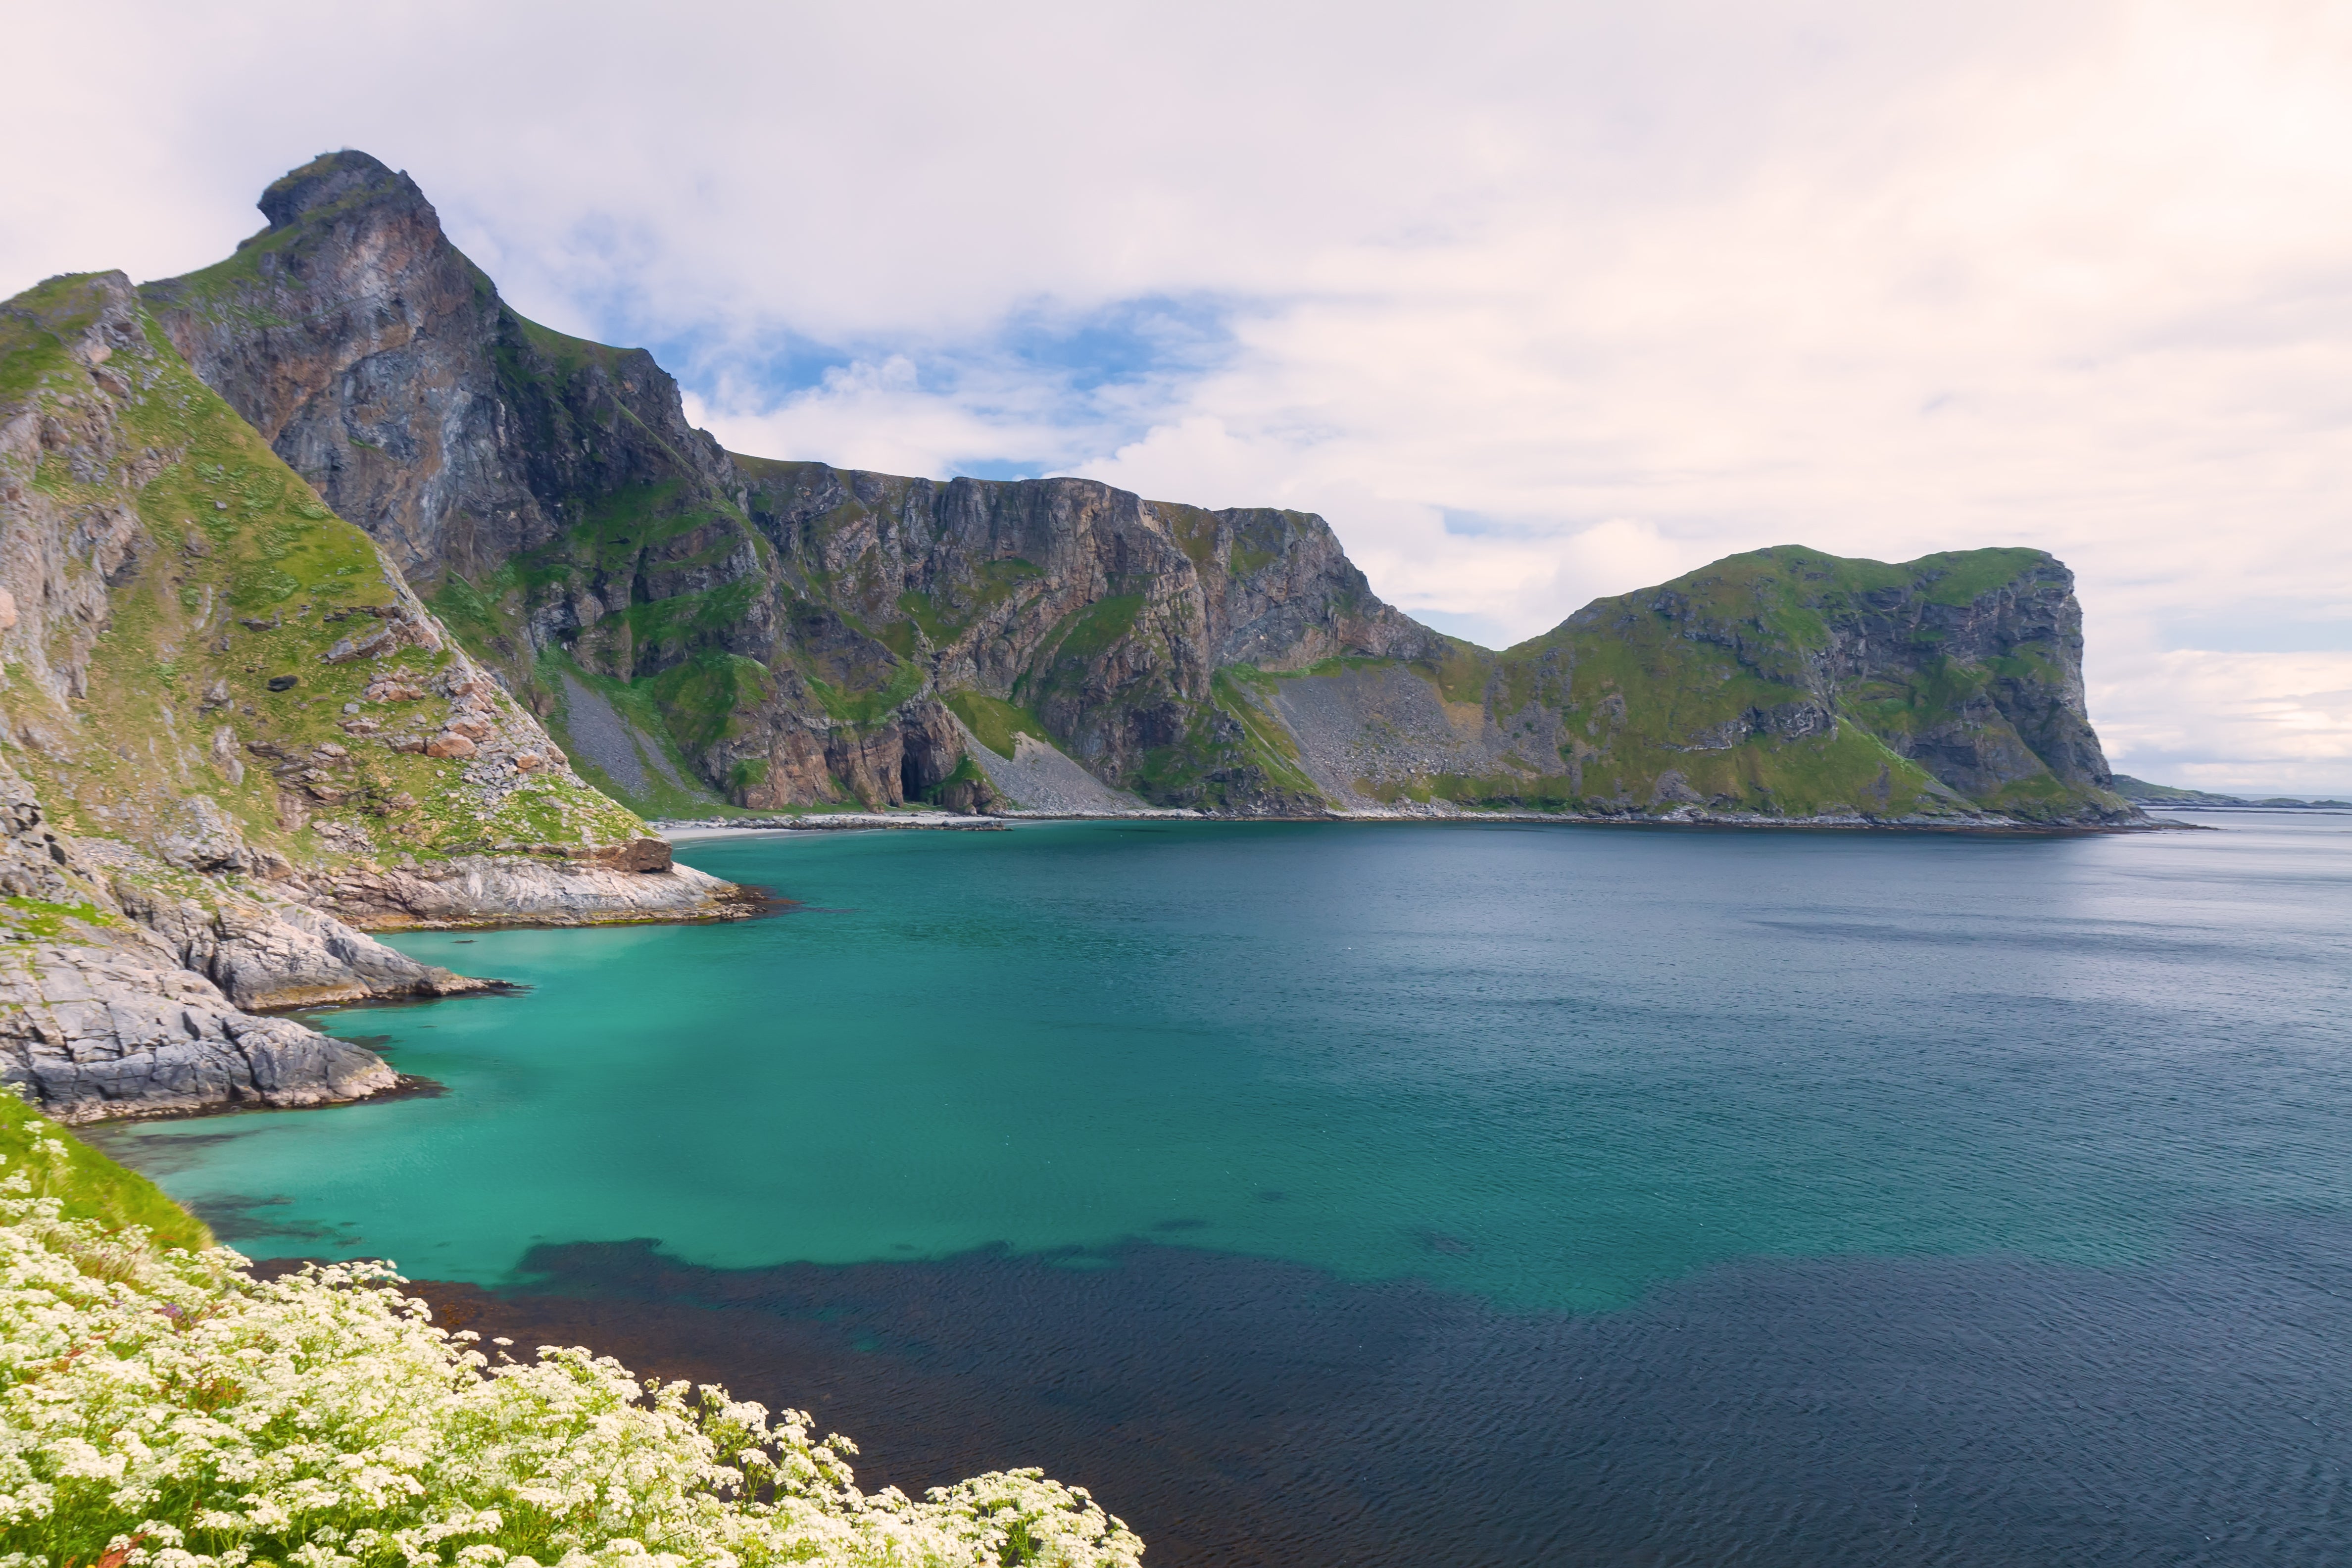 The Loftoten Islands is frequently praised for its beauty